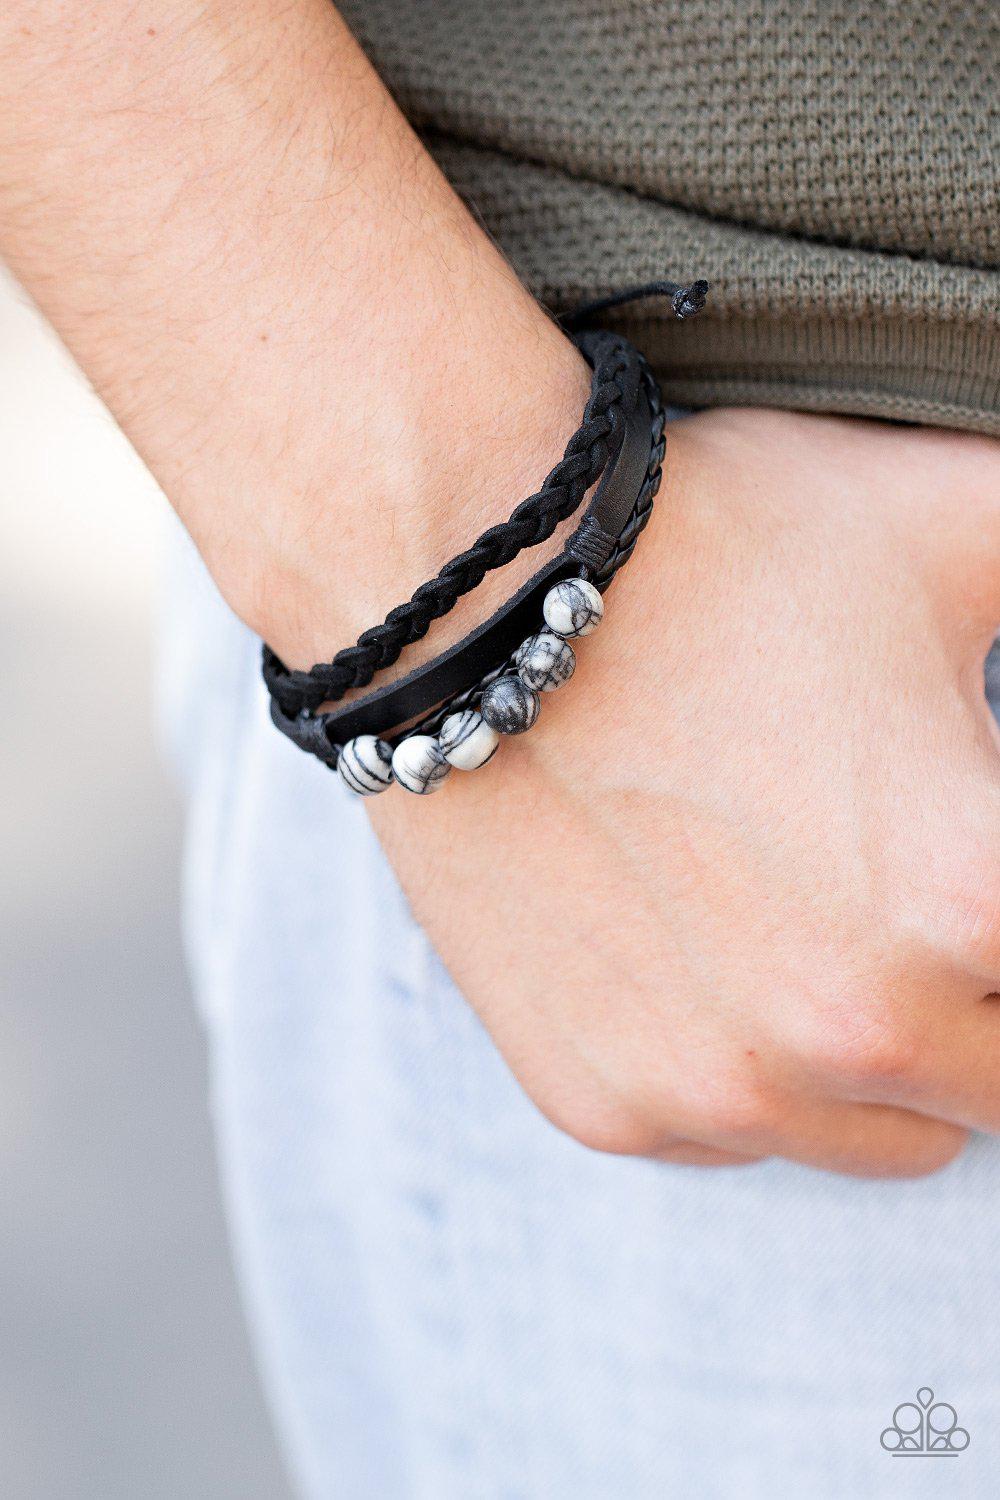 Off-Road Rebel Black and White Stone Urban Knot Bracelet - Paparazzi Accessories-CarasShop.com - $5 Jewelry by Cara Jewels